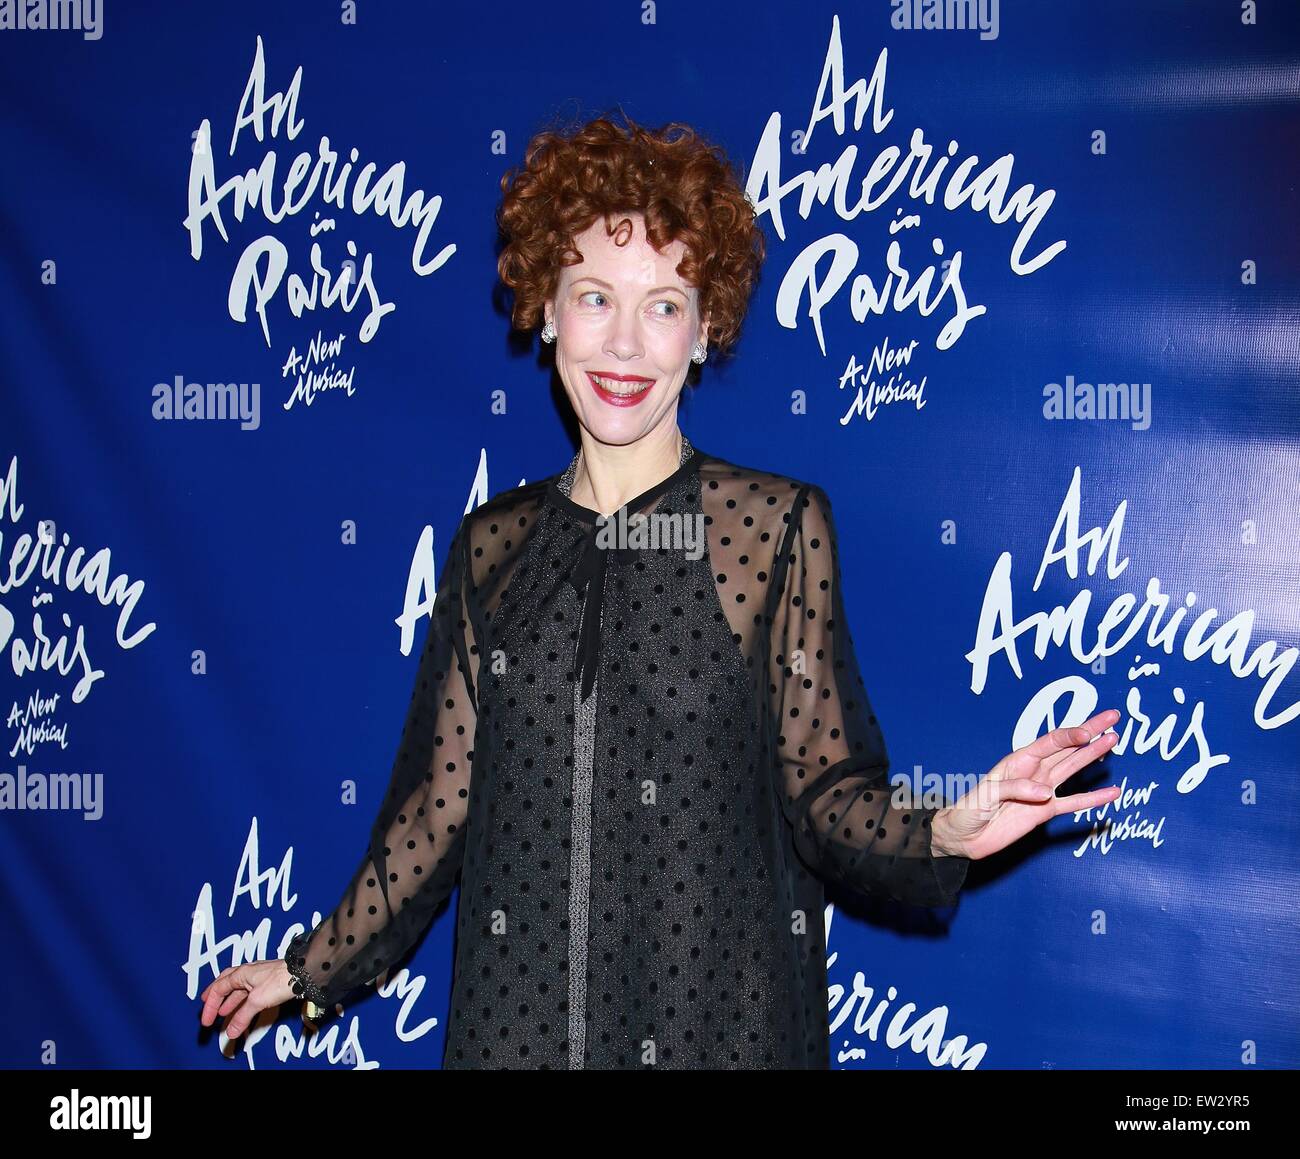 Opening night after party for An American in Paris at The Pierre Hotel - Arrivals.  Featuring: Veanne Cox Where: New York City, New York, United States When: 12 Apr 2015 C Stock Photo